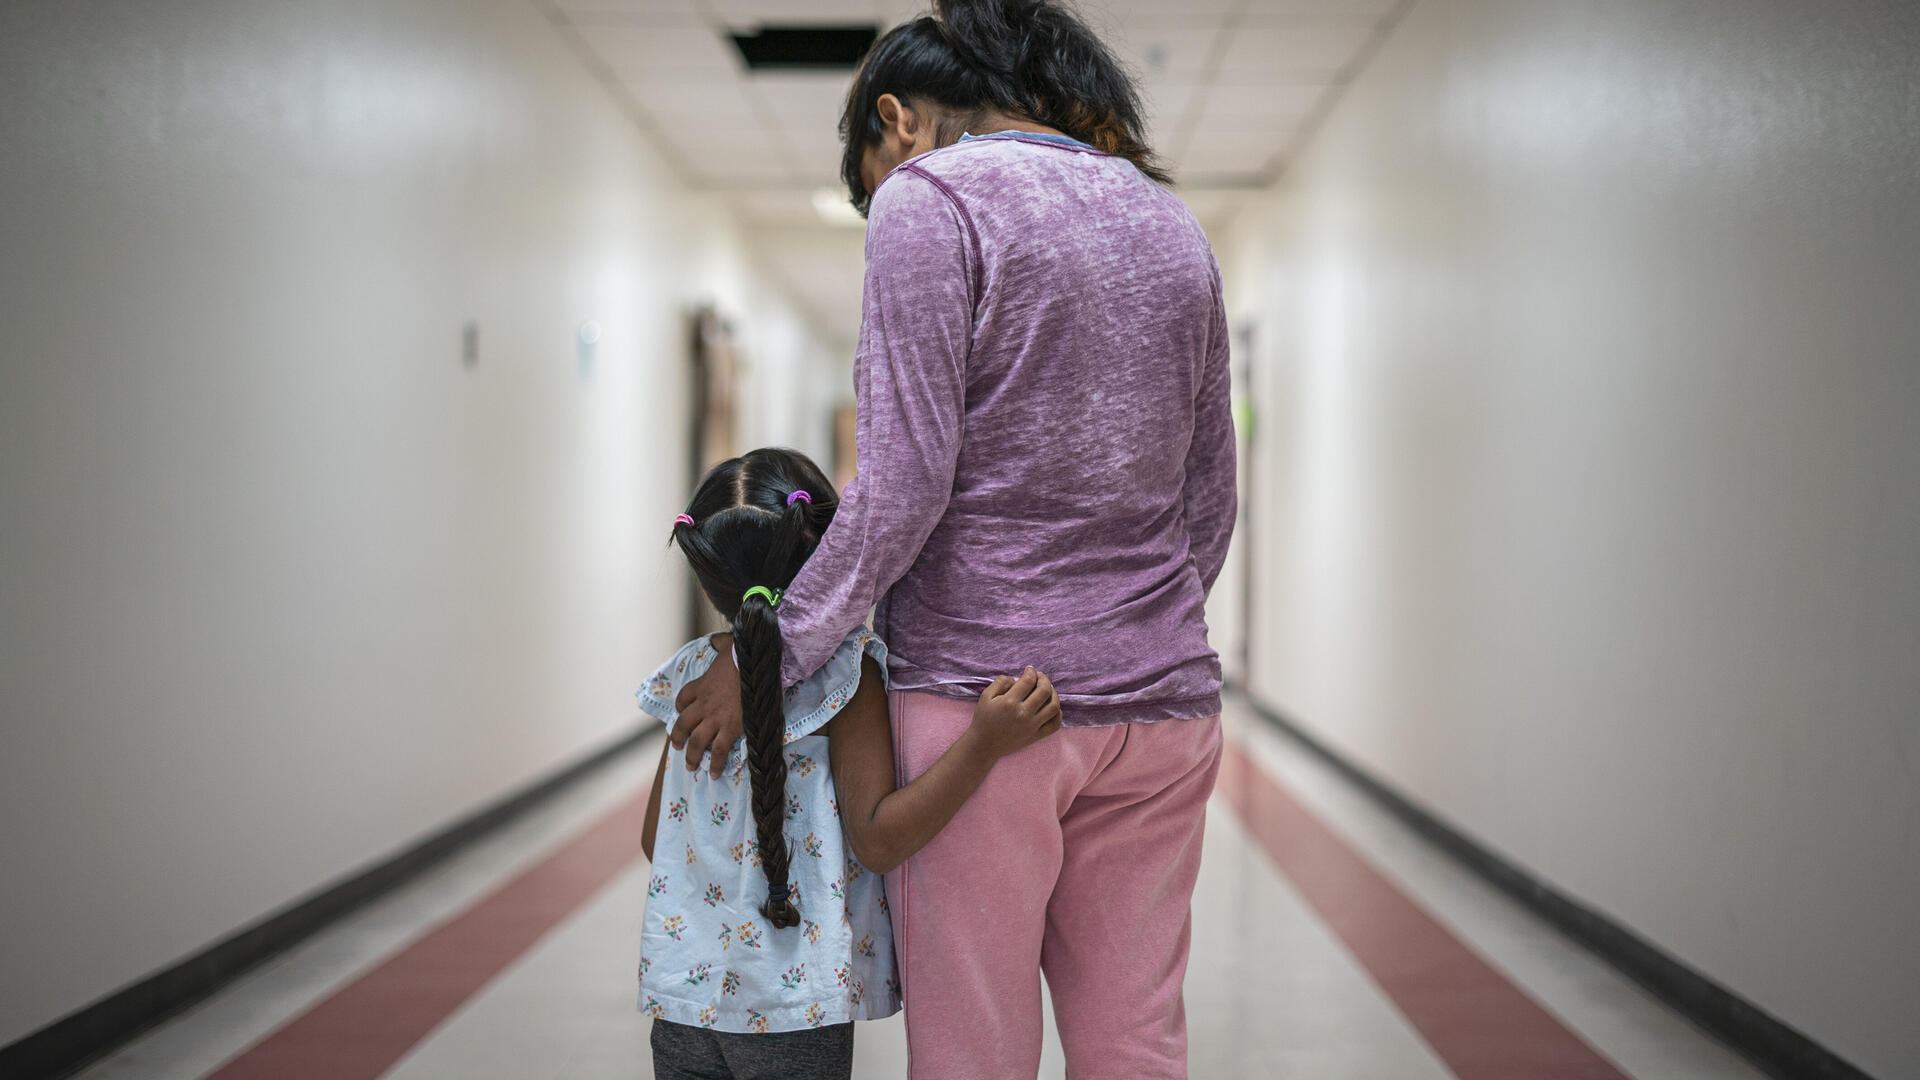 A Mexican mother wearing pink pants and a purple shirt stands with her arms around her young daughter, who has a long braid, in a hallway. They are asylum seekers in an IRC welcome center. 